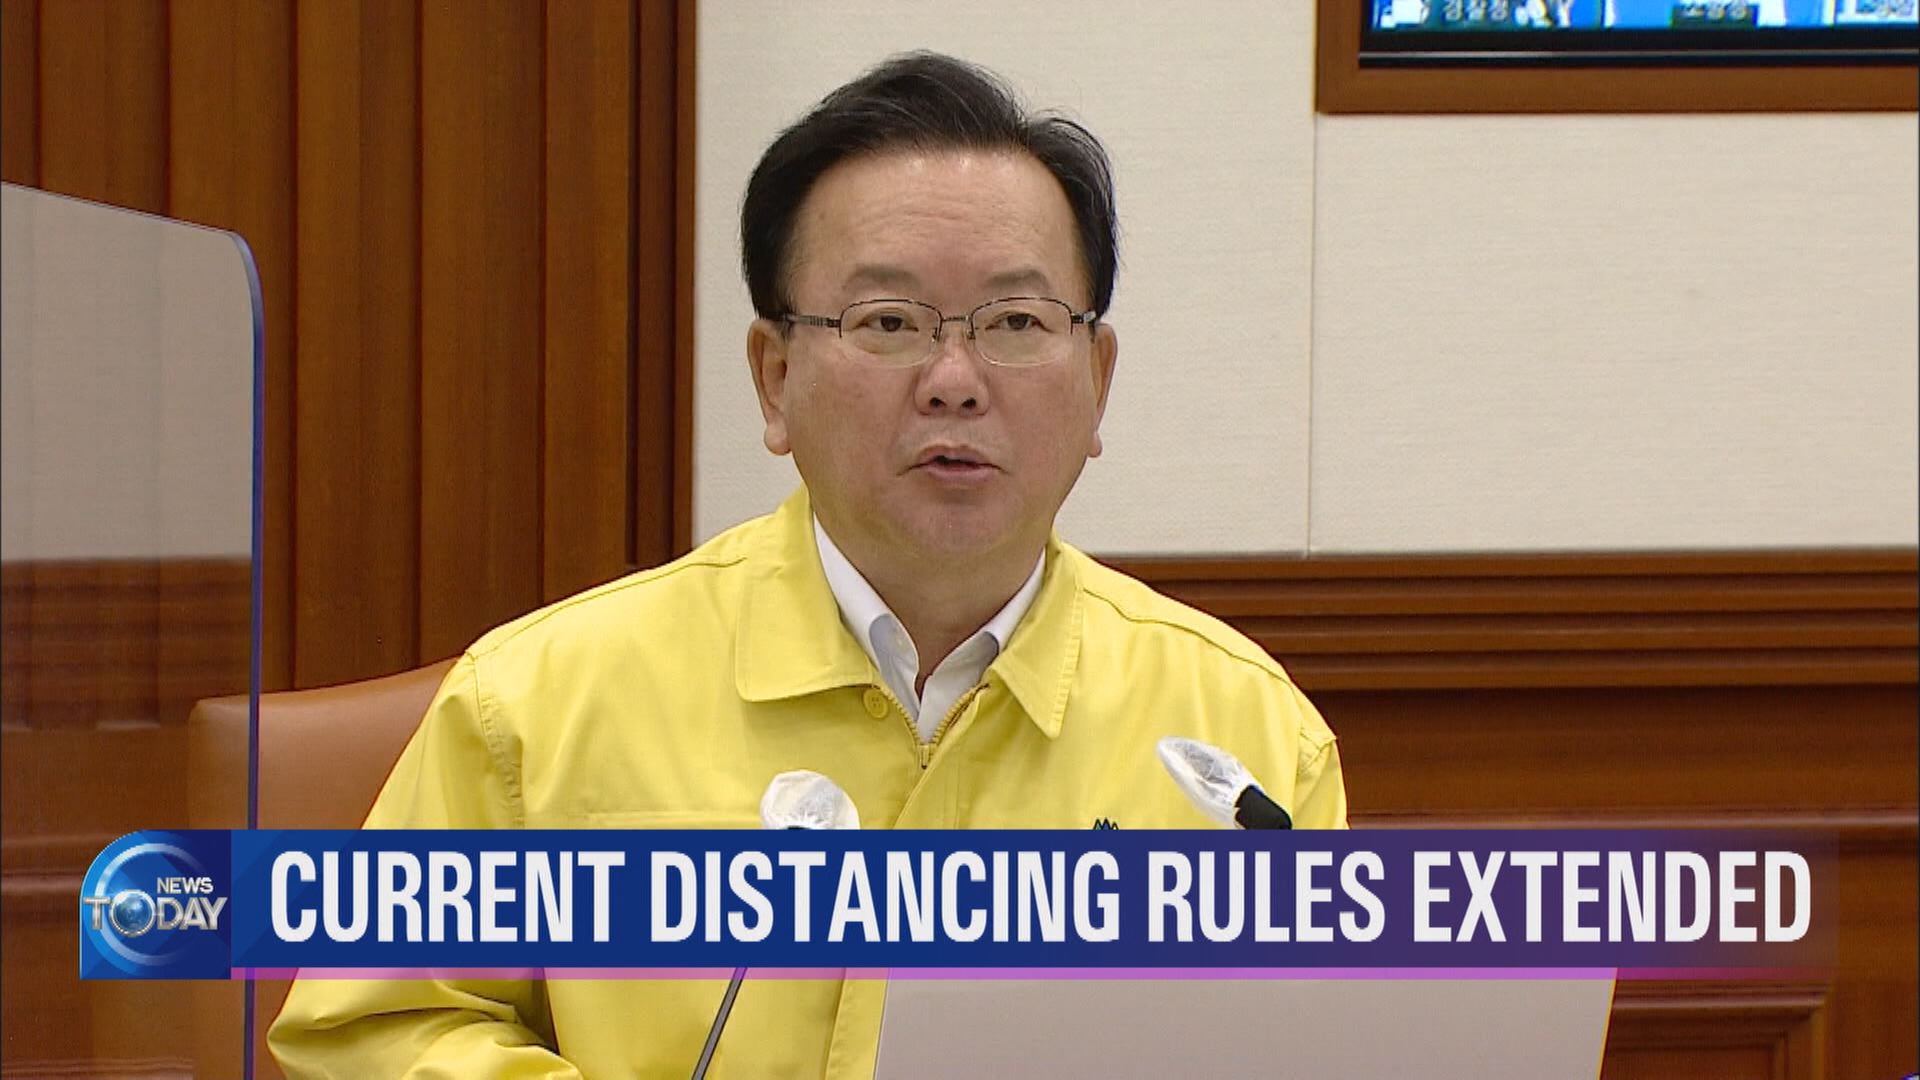 CURRENT DISTANCING RULES EXTENDED